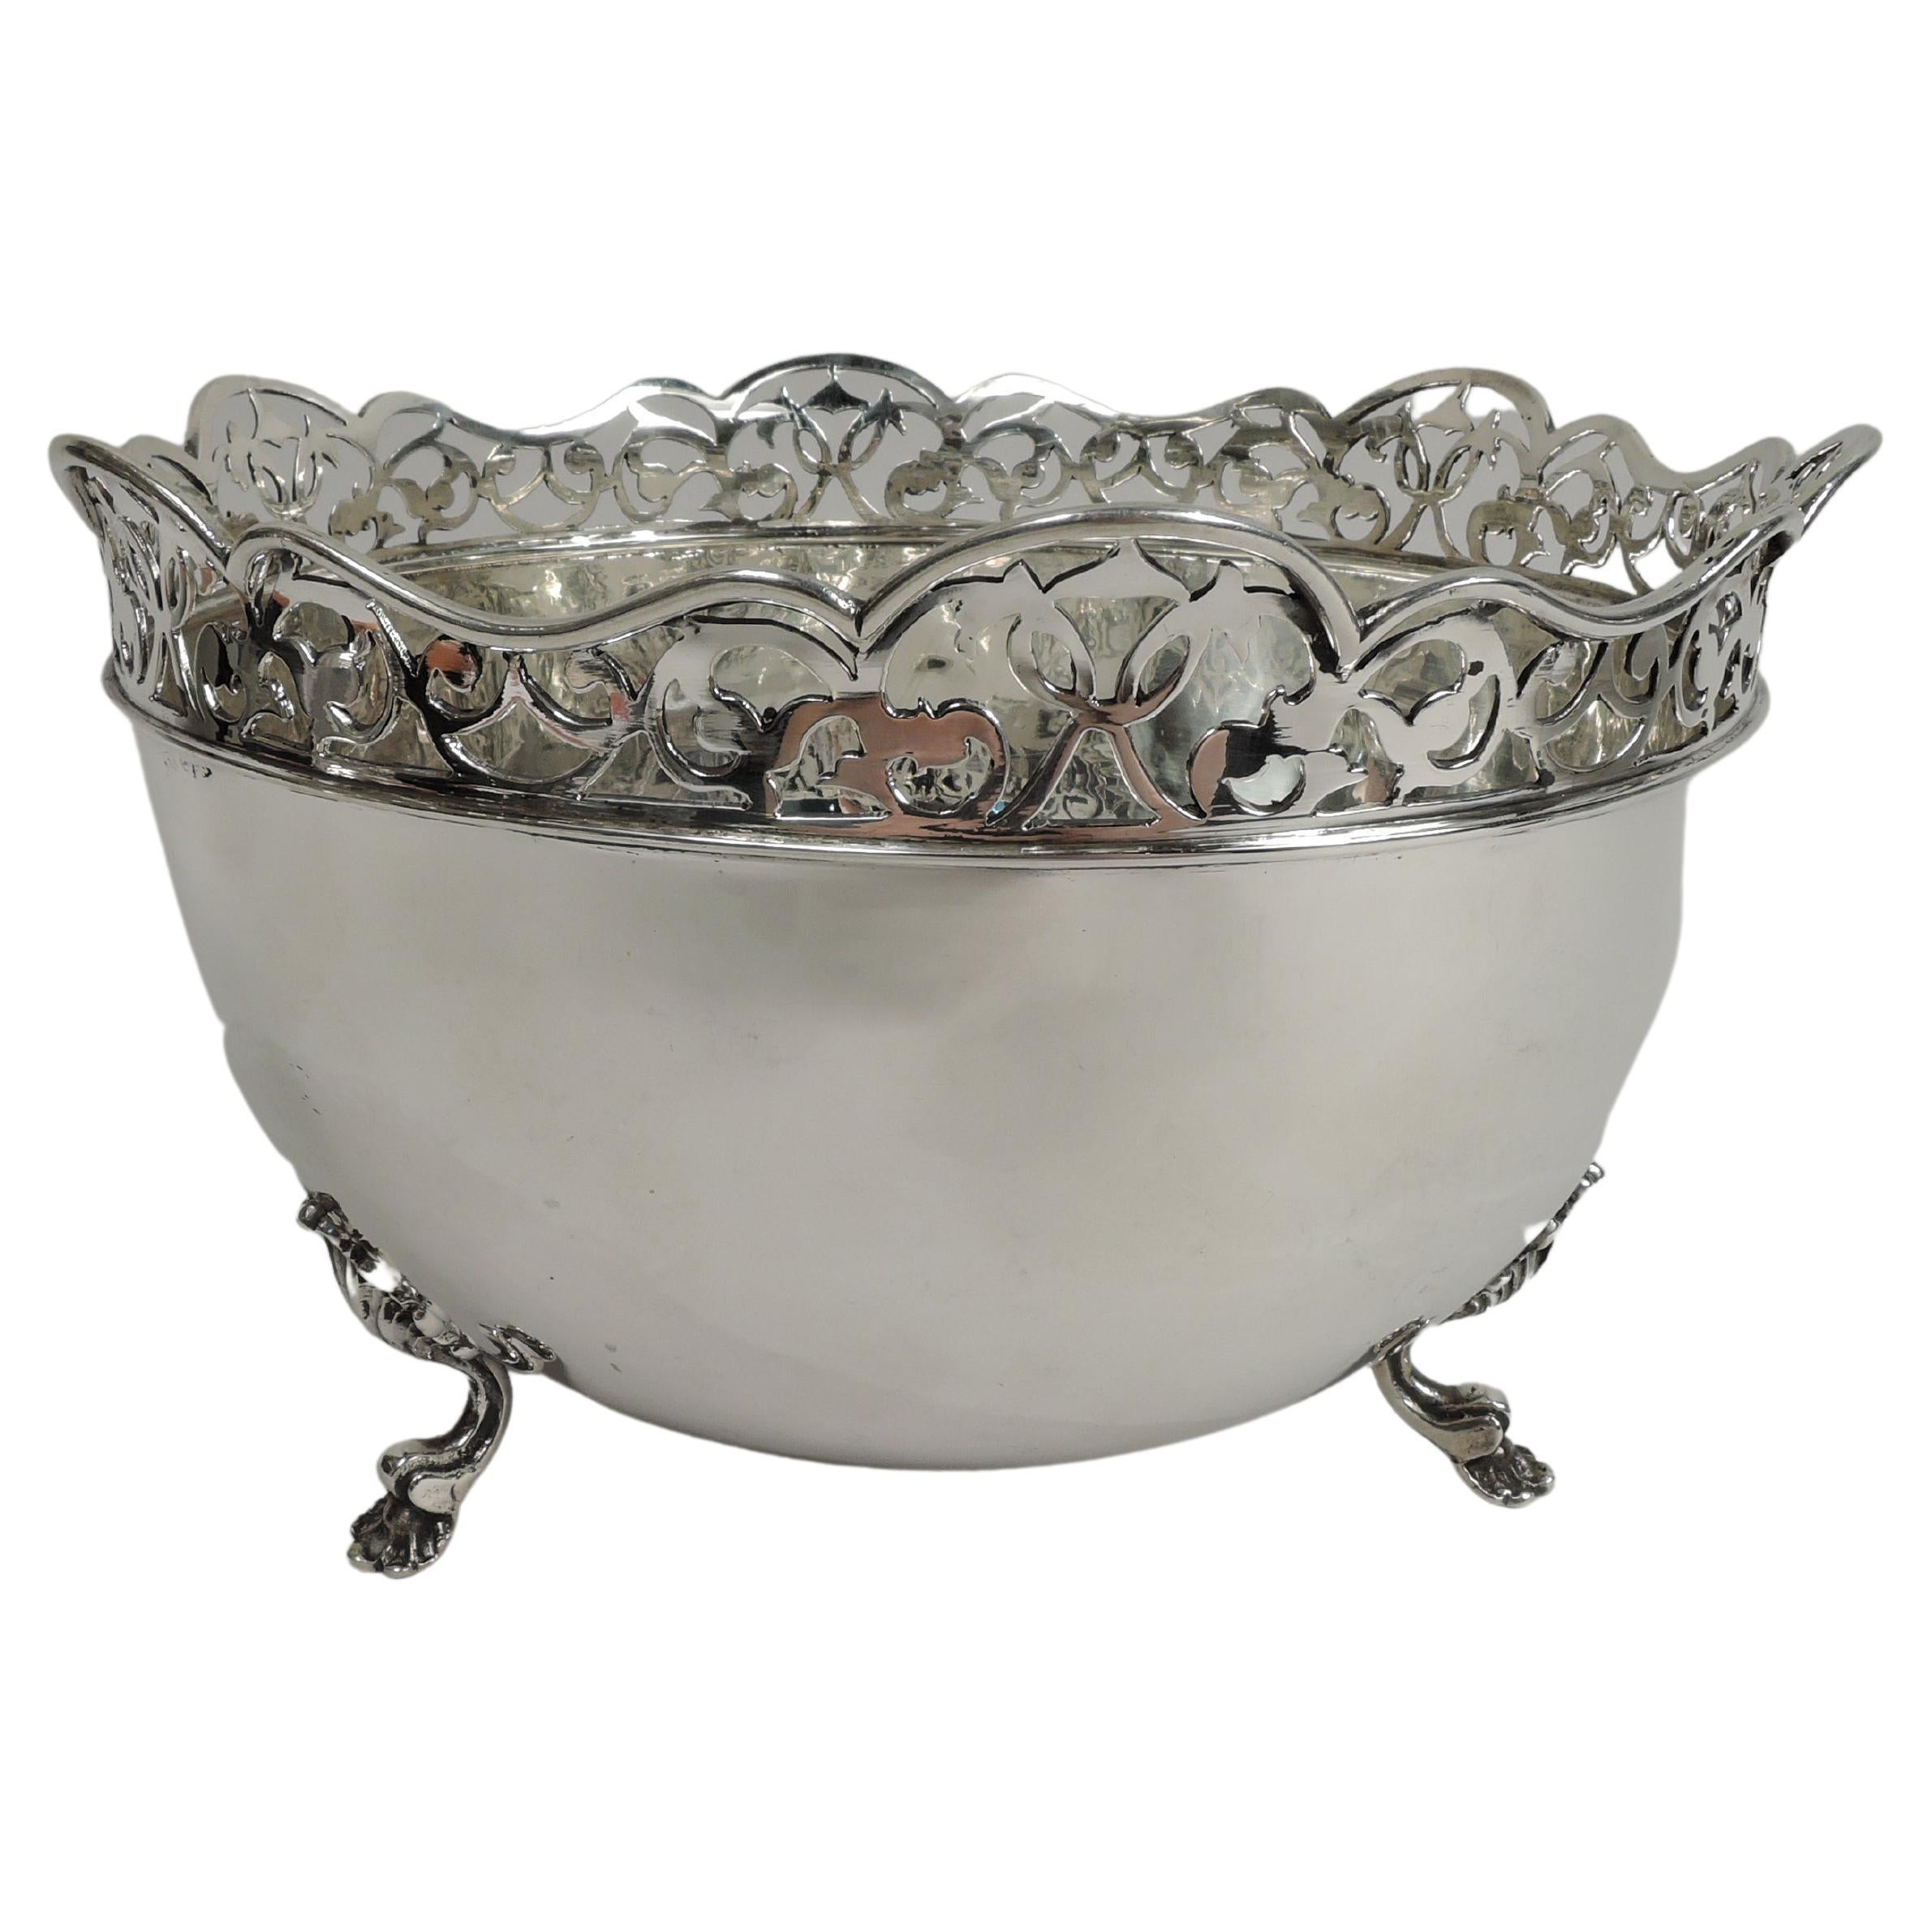 Pretty Antique English Edwardian Classical Sterling Silver Bowl